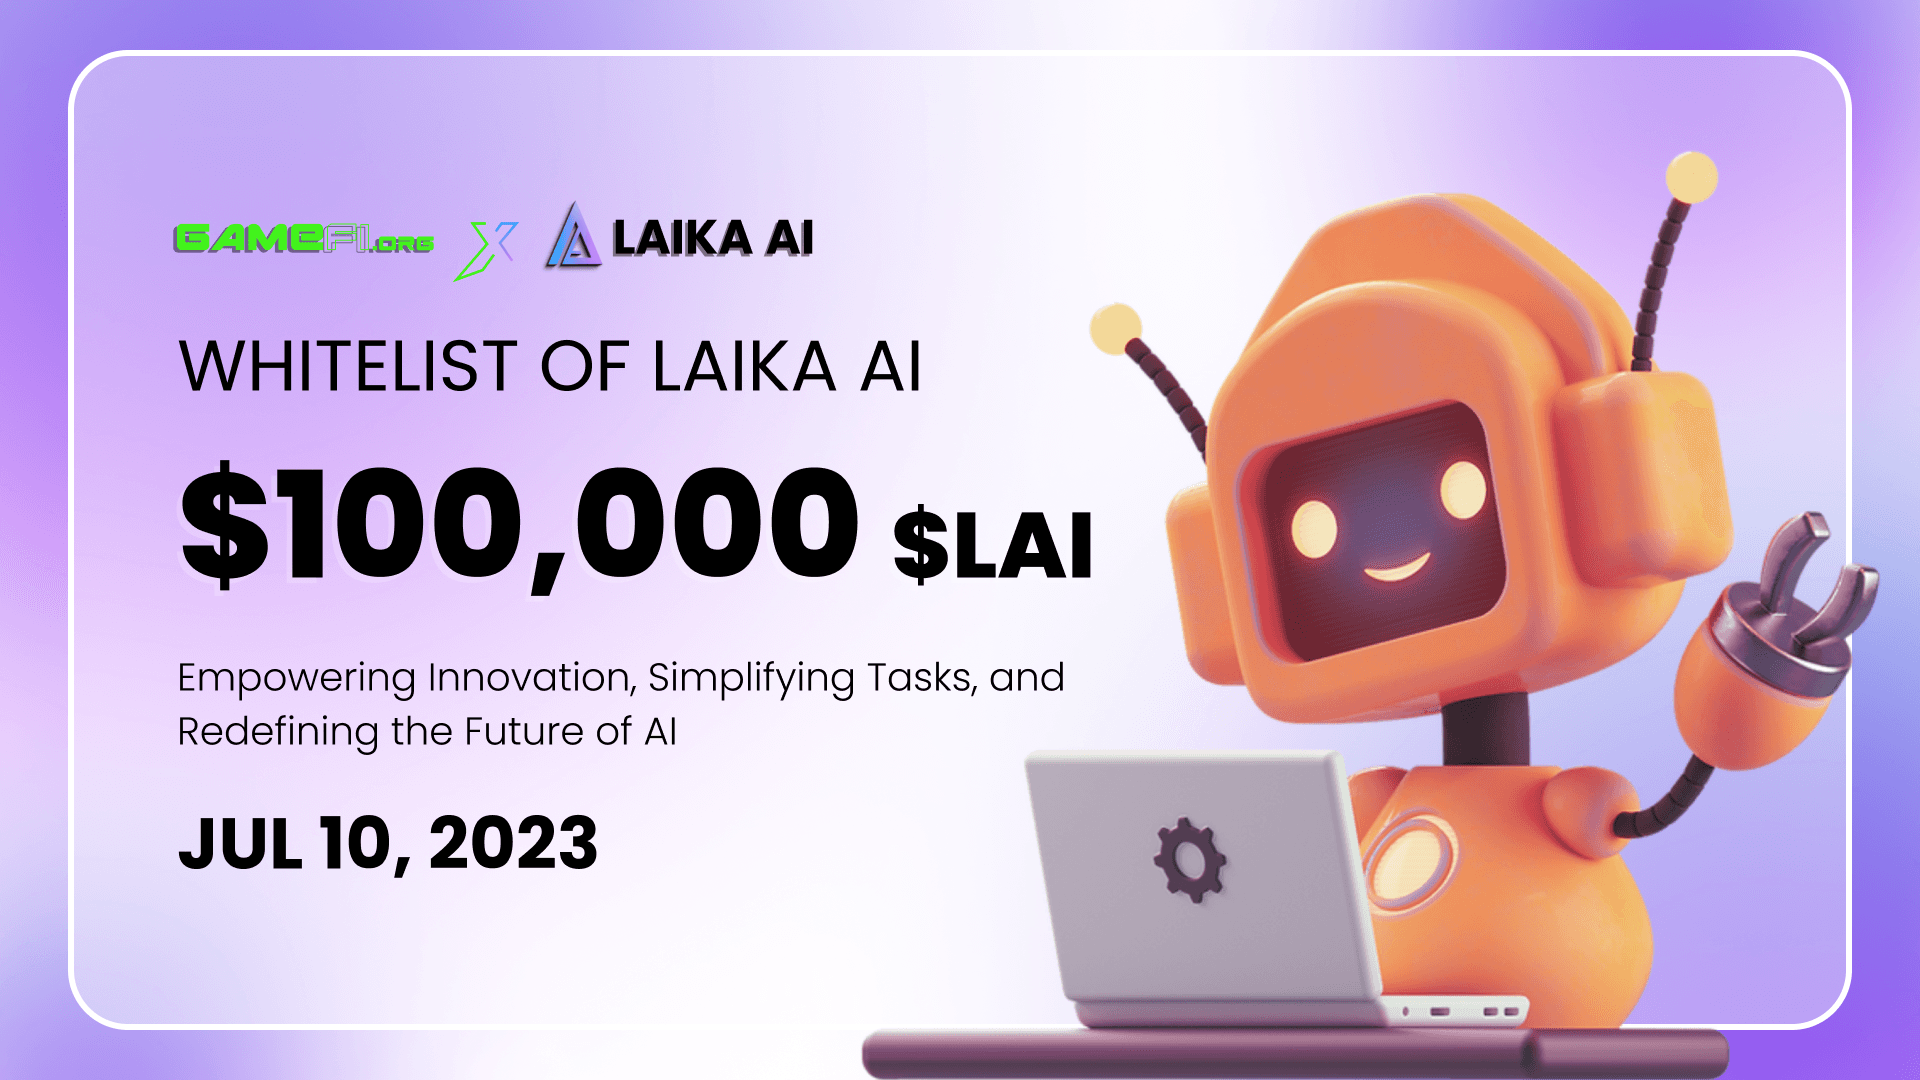 Laika AI: Empowering Innovation, Simplifying Tasks, and Redefining the Future of AI!